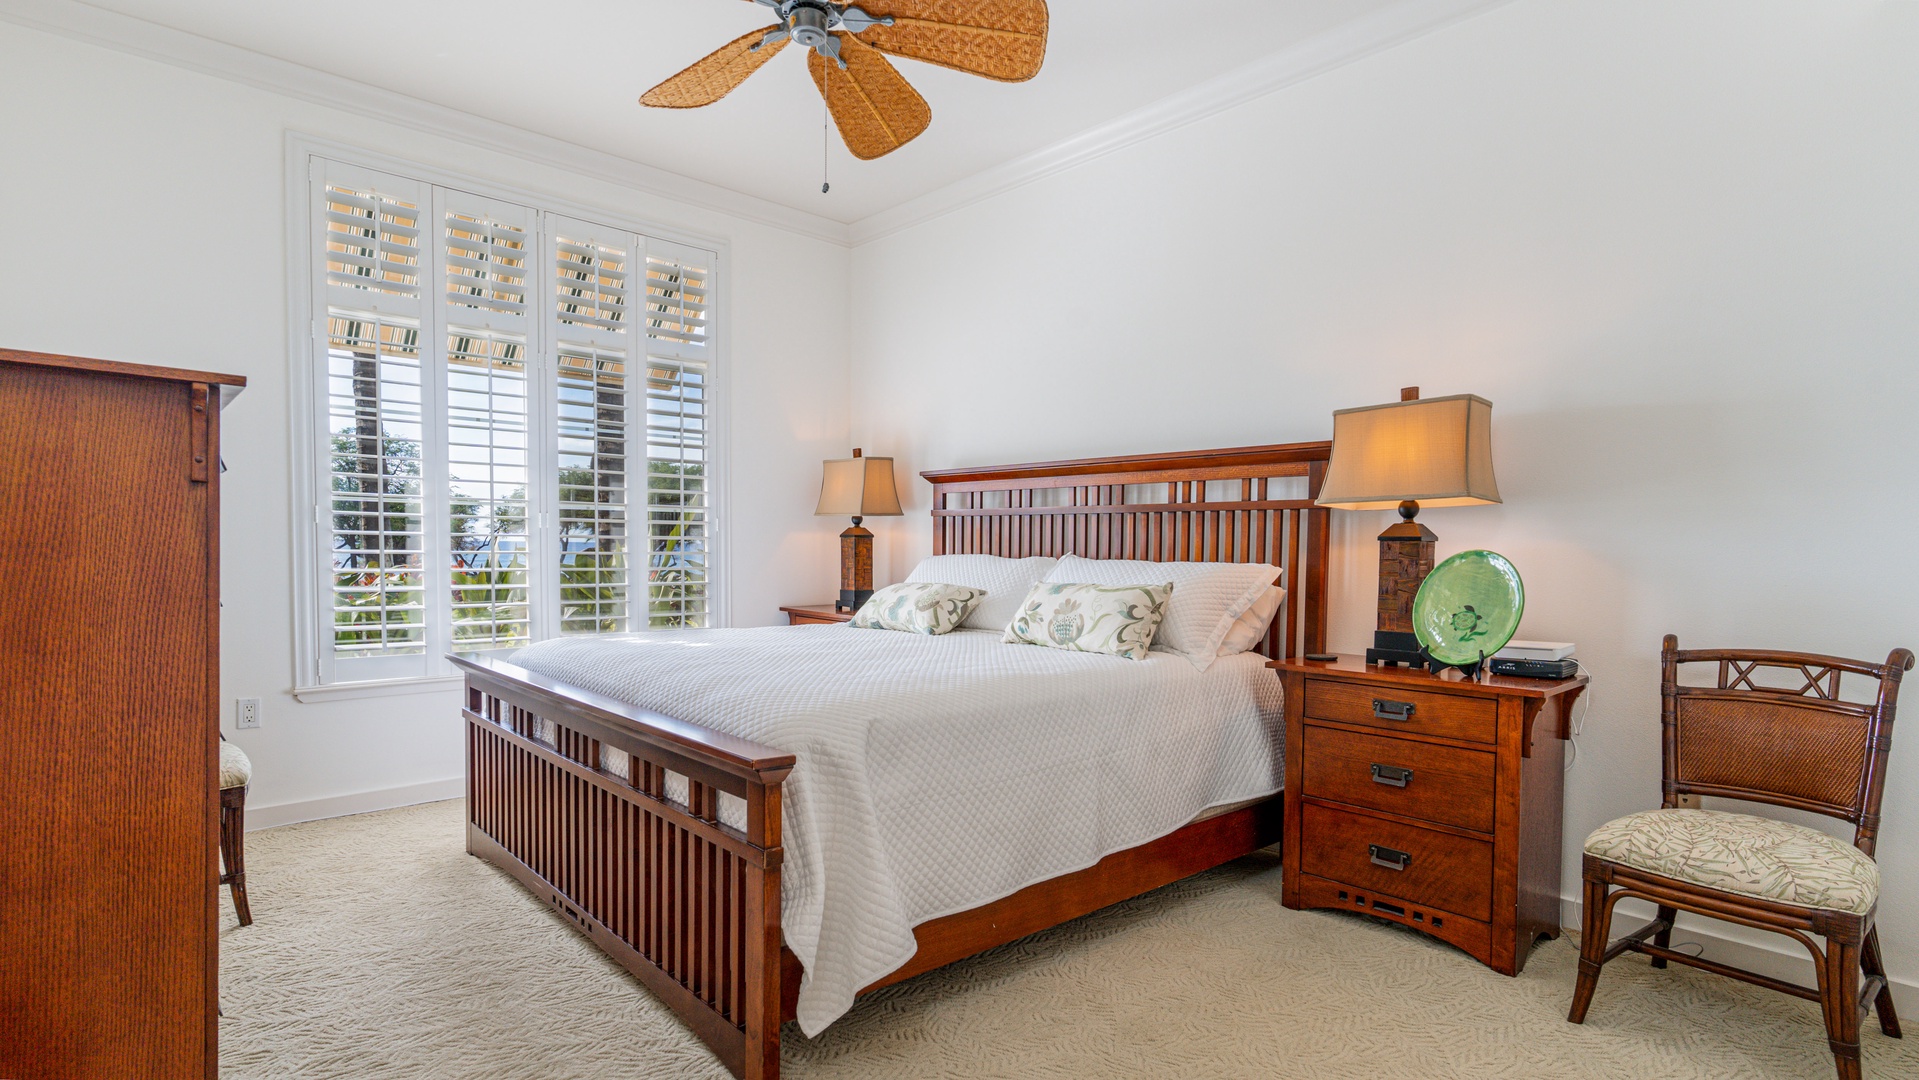 Kapolei Vacation Rentals, Kai Lani 24B - The spacious primary guest bedroom with scenery.